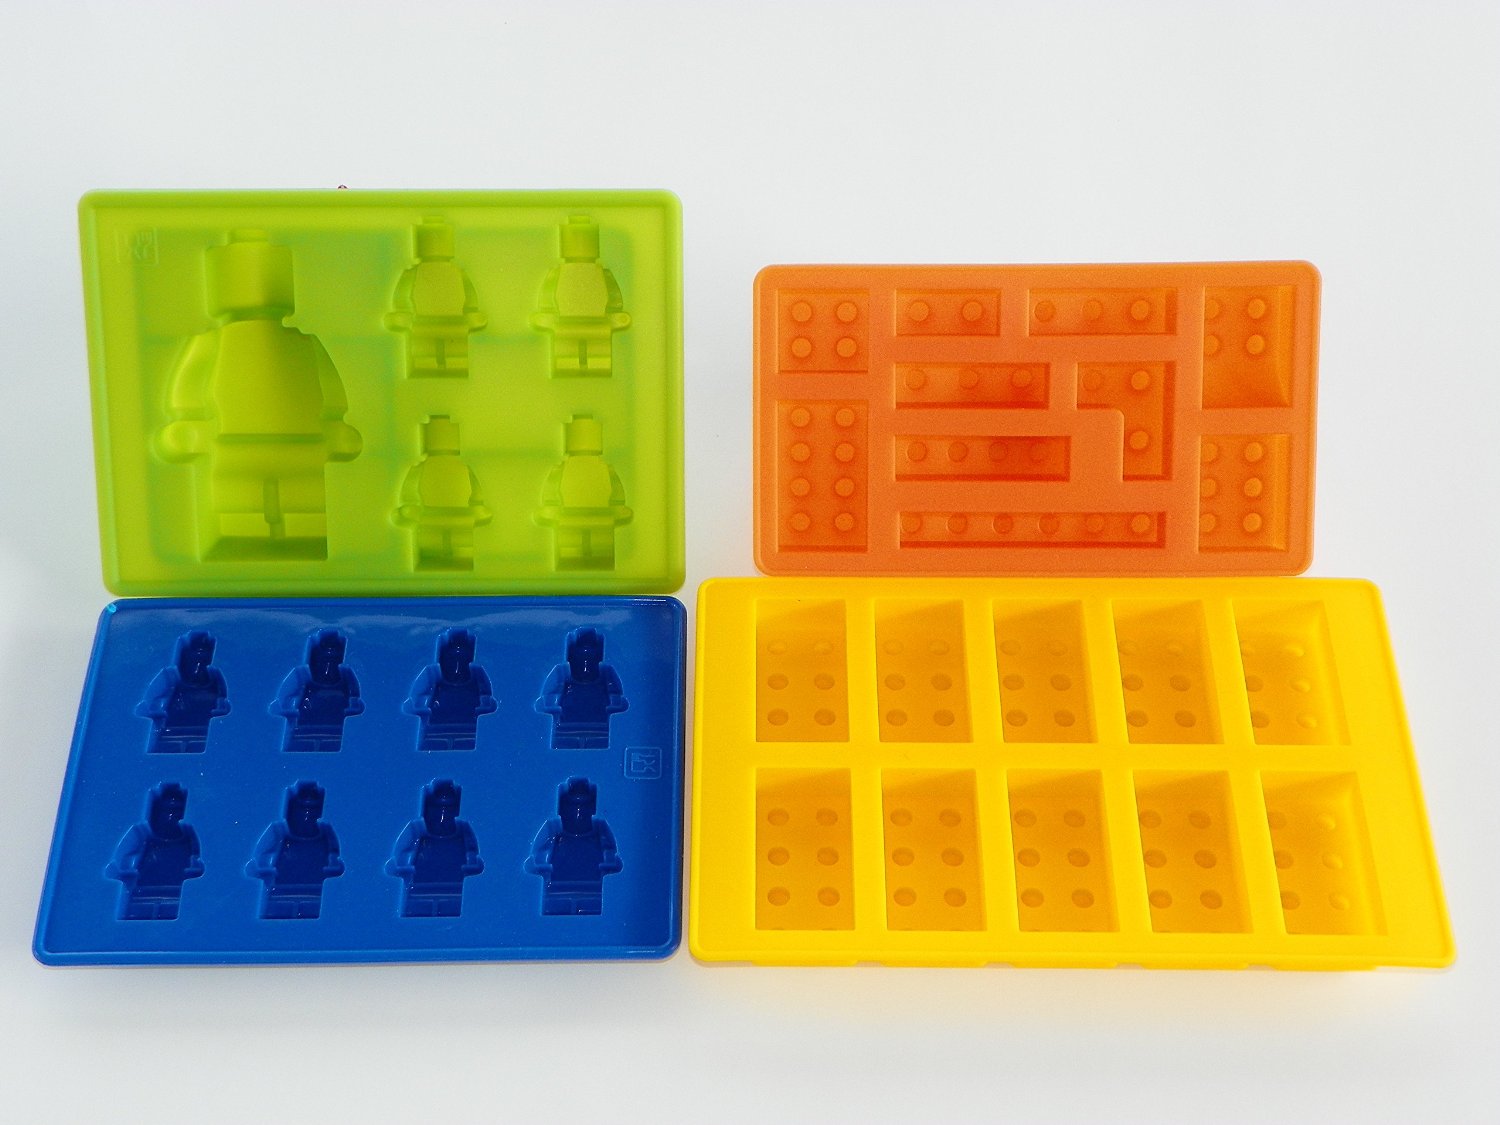 Set of 4 LEGO Silicone Molds Only $9.99 + Free Shipping!